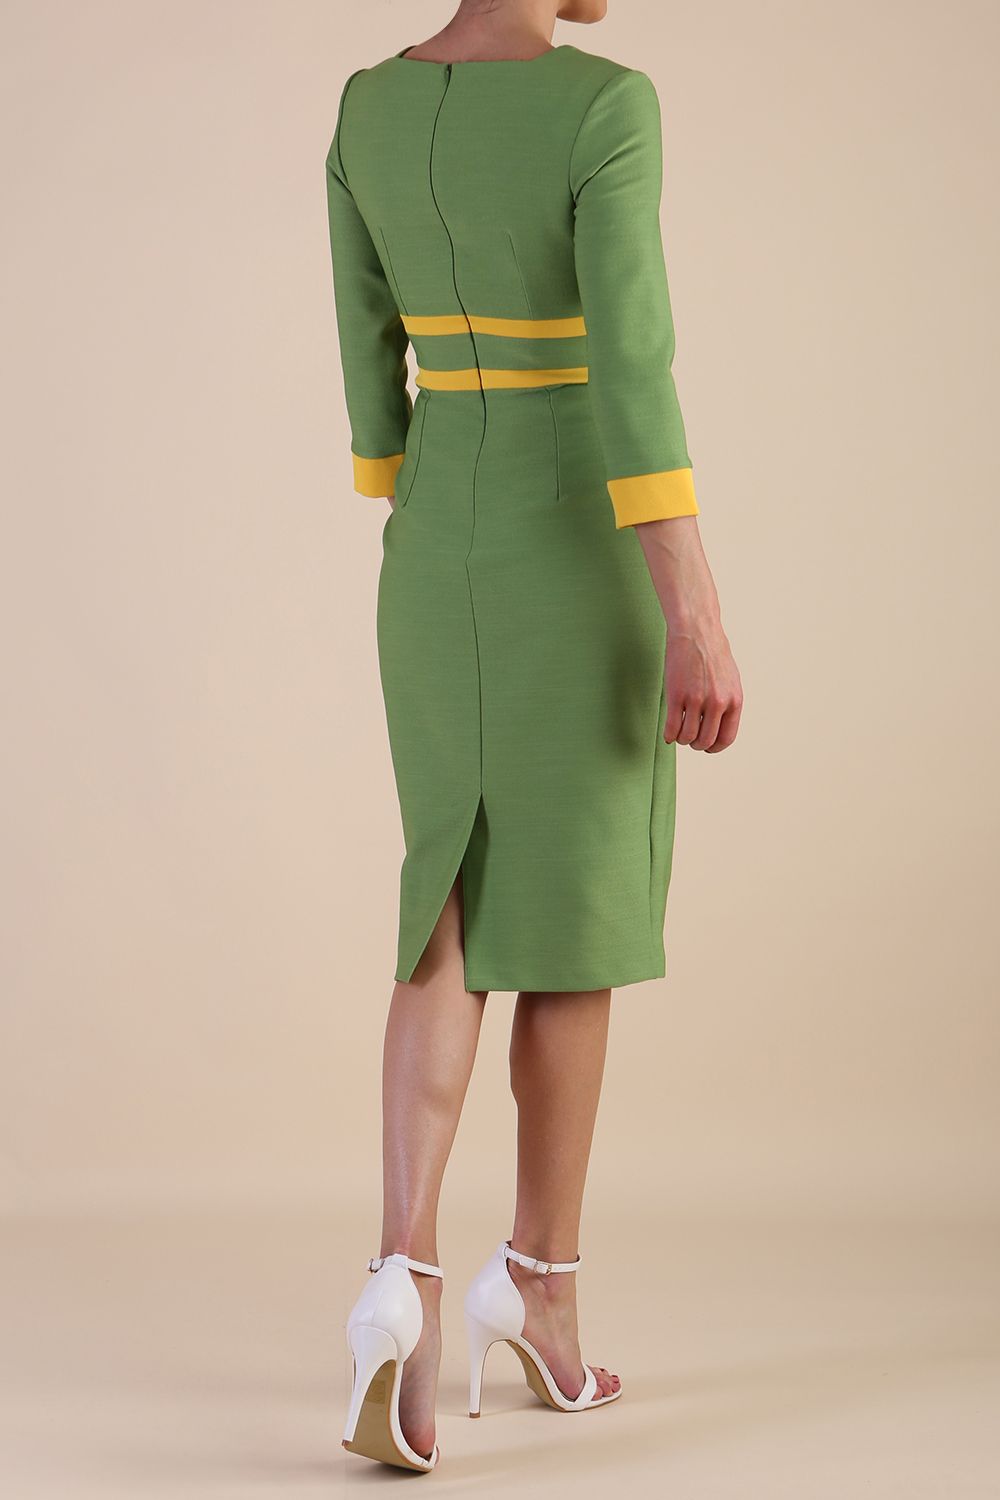 Model wearing Diva catwalk Paeonia dress square neckline with a vent in Citrus Green with Daffodil Yellow and Citrus Green stripes around the waist and three quarter sleeve with Daffodil Yellow contrast finish back